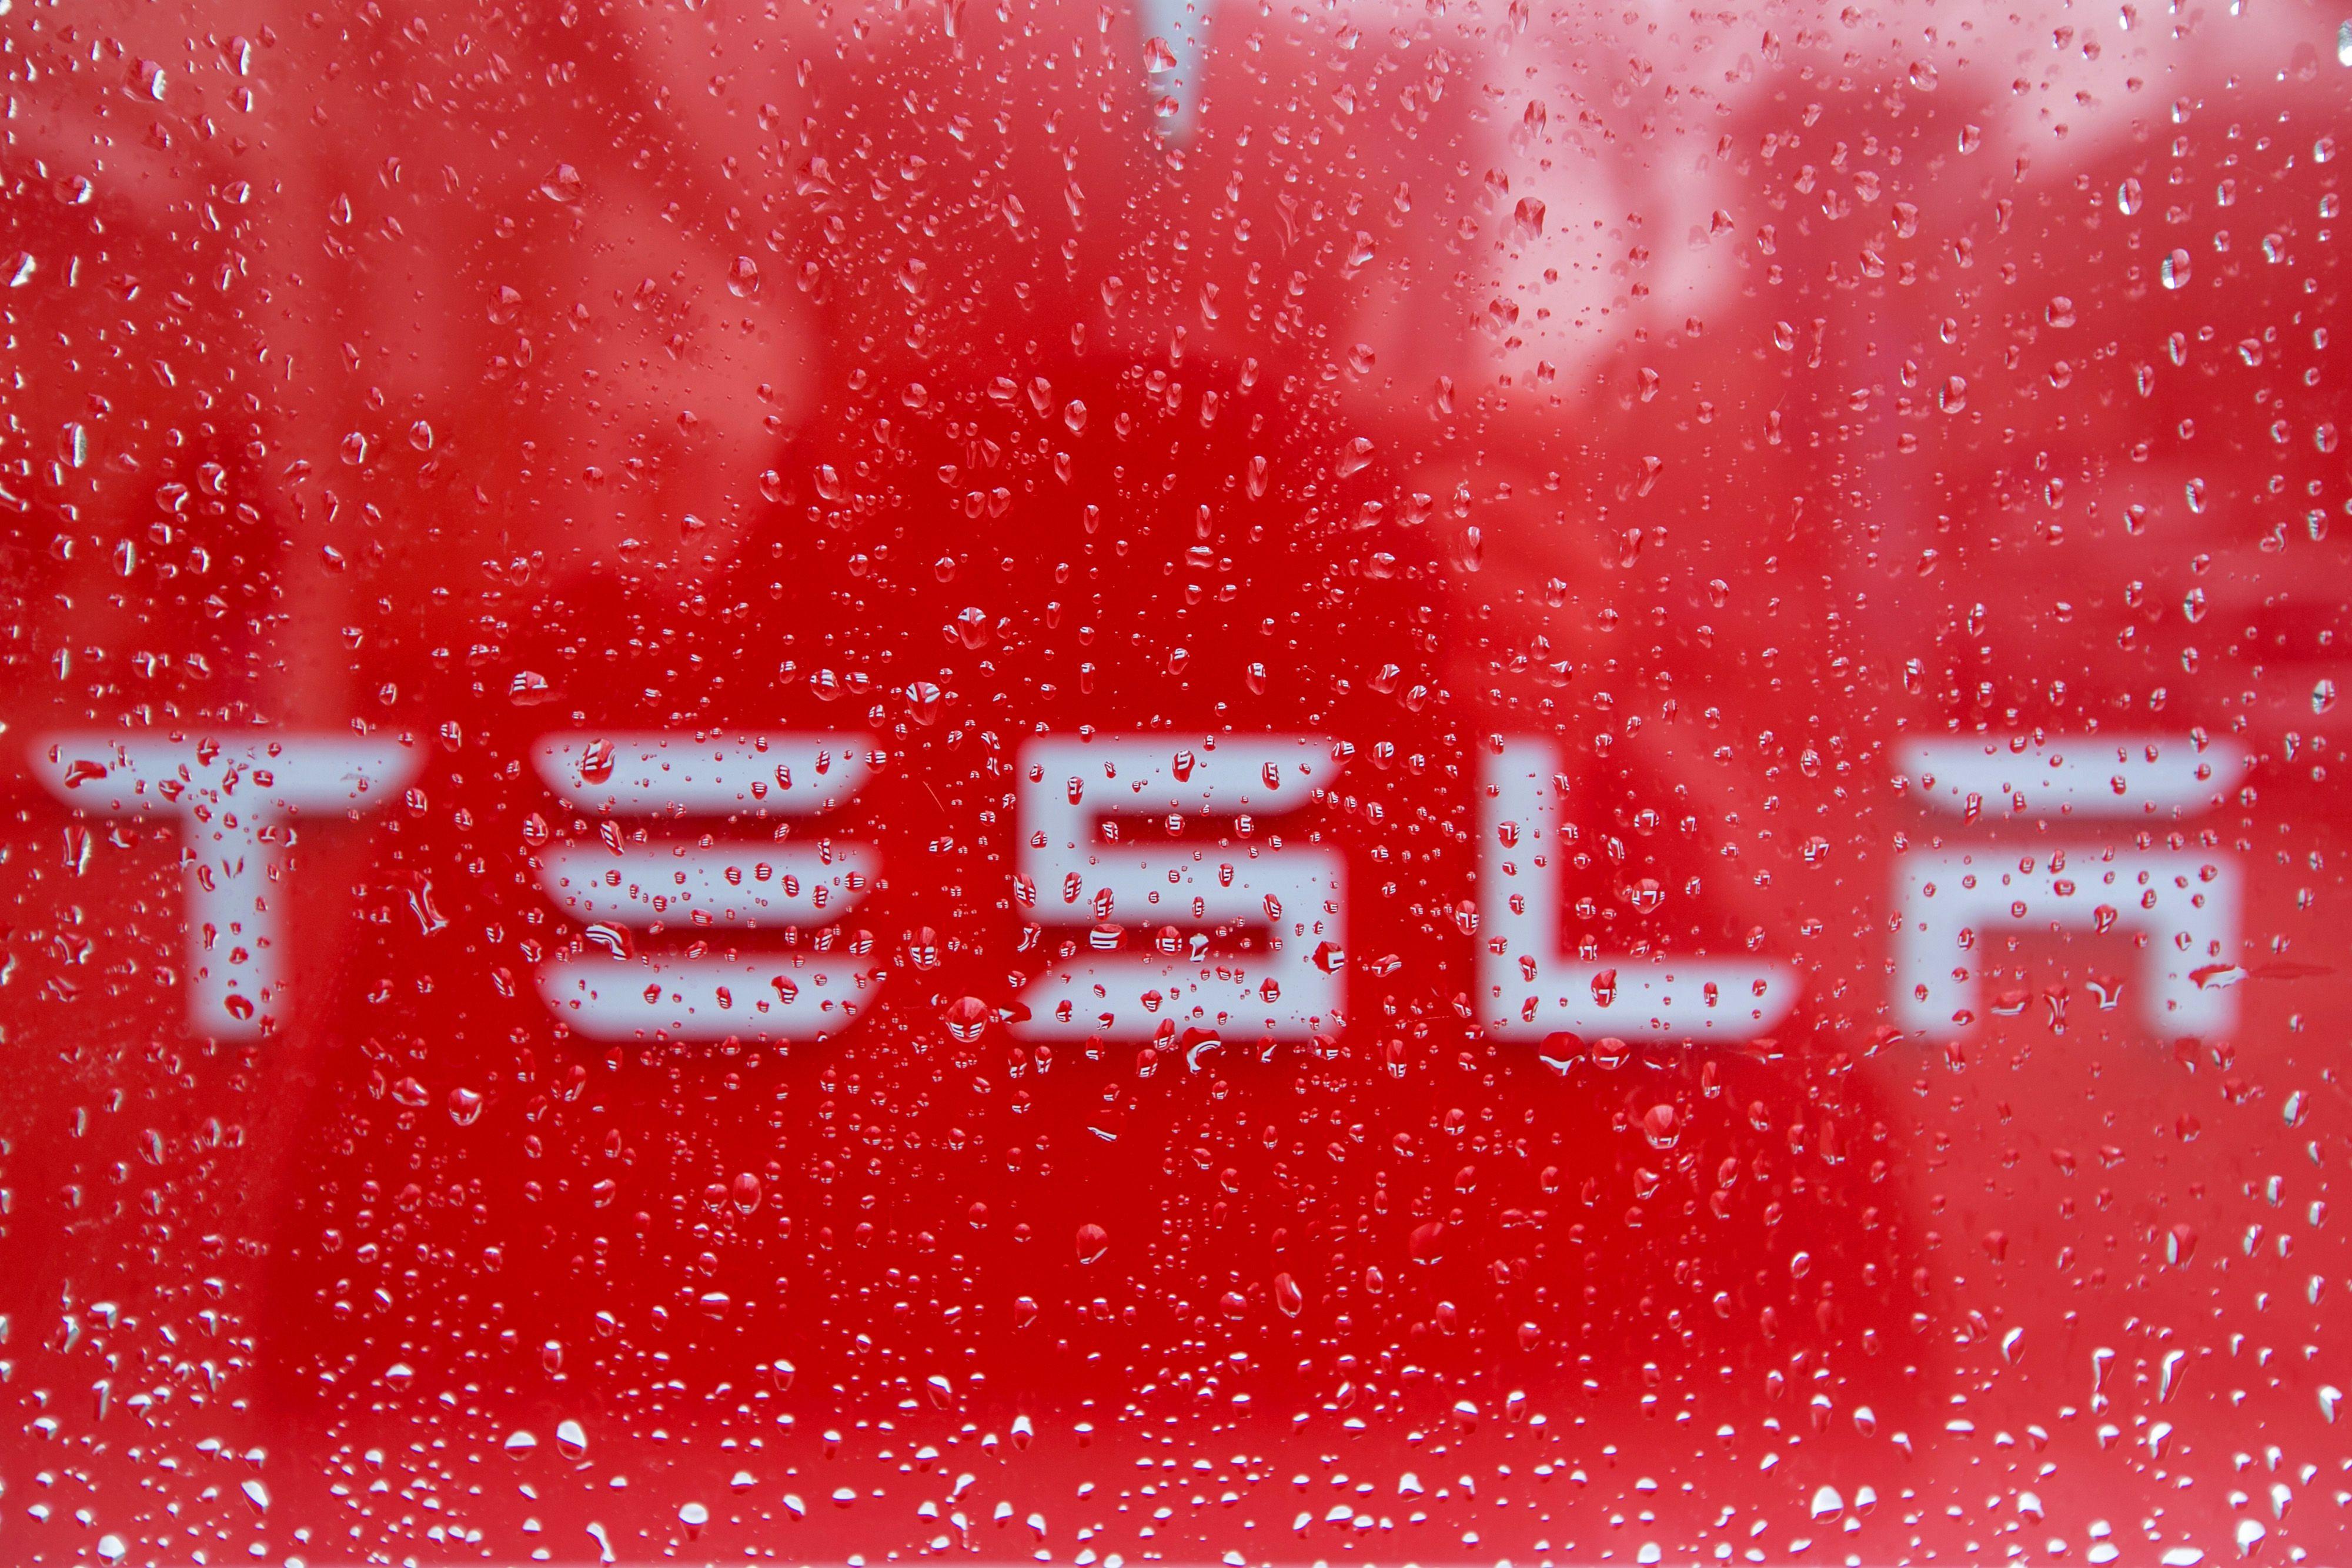 2017 Tesla Logo - Tesla Offers Sweeteners to Quell Unrest at German Supplier | Fortune